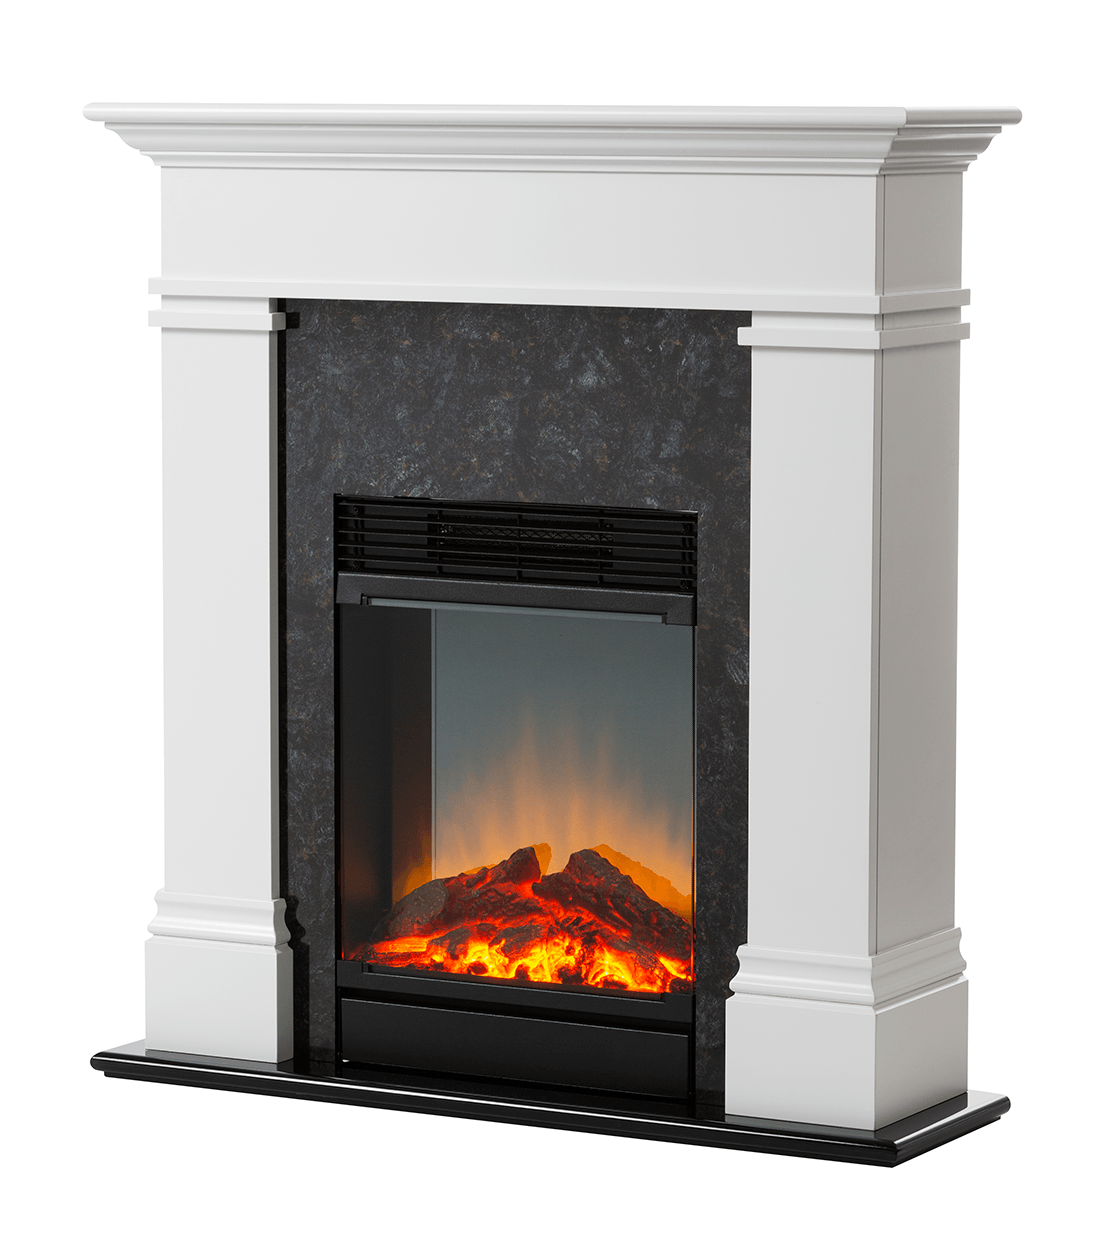 Dimplex 1.5kW Taylor Mini Suite with LED Firebox and White Finish